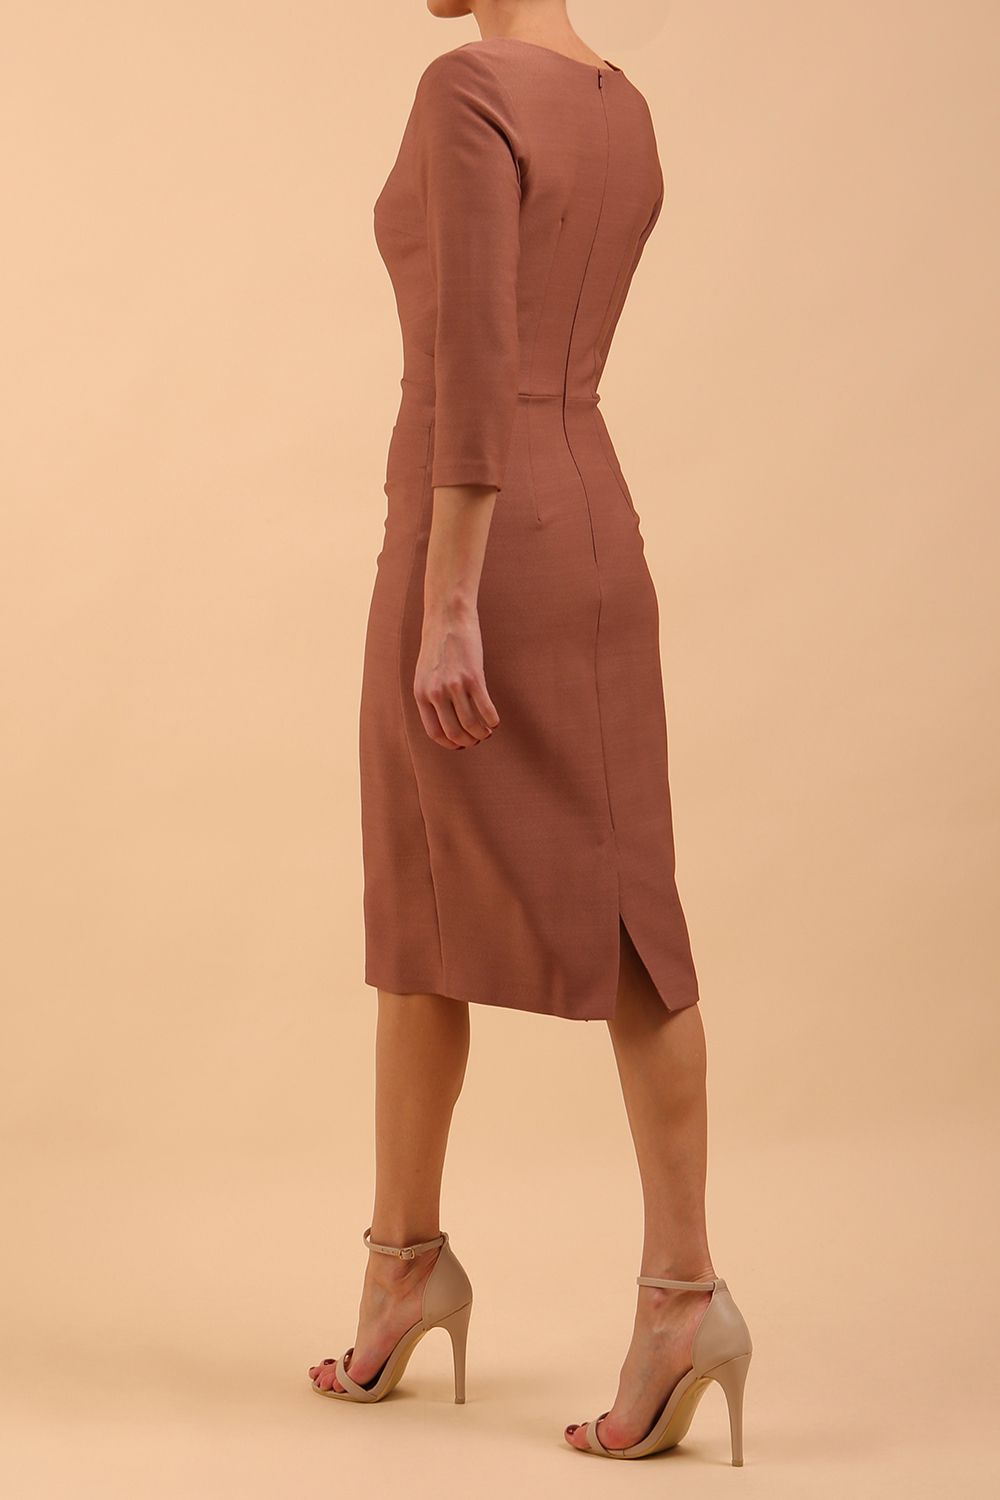 brunette model wearing diva catwalk couture althorp pencil fitted dress with sleeves and rounded neckline and bow detail at the top in acorn brown colour back side